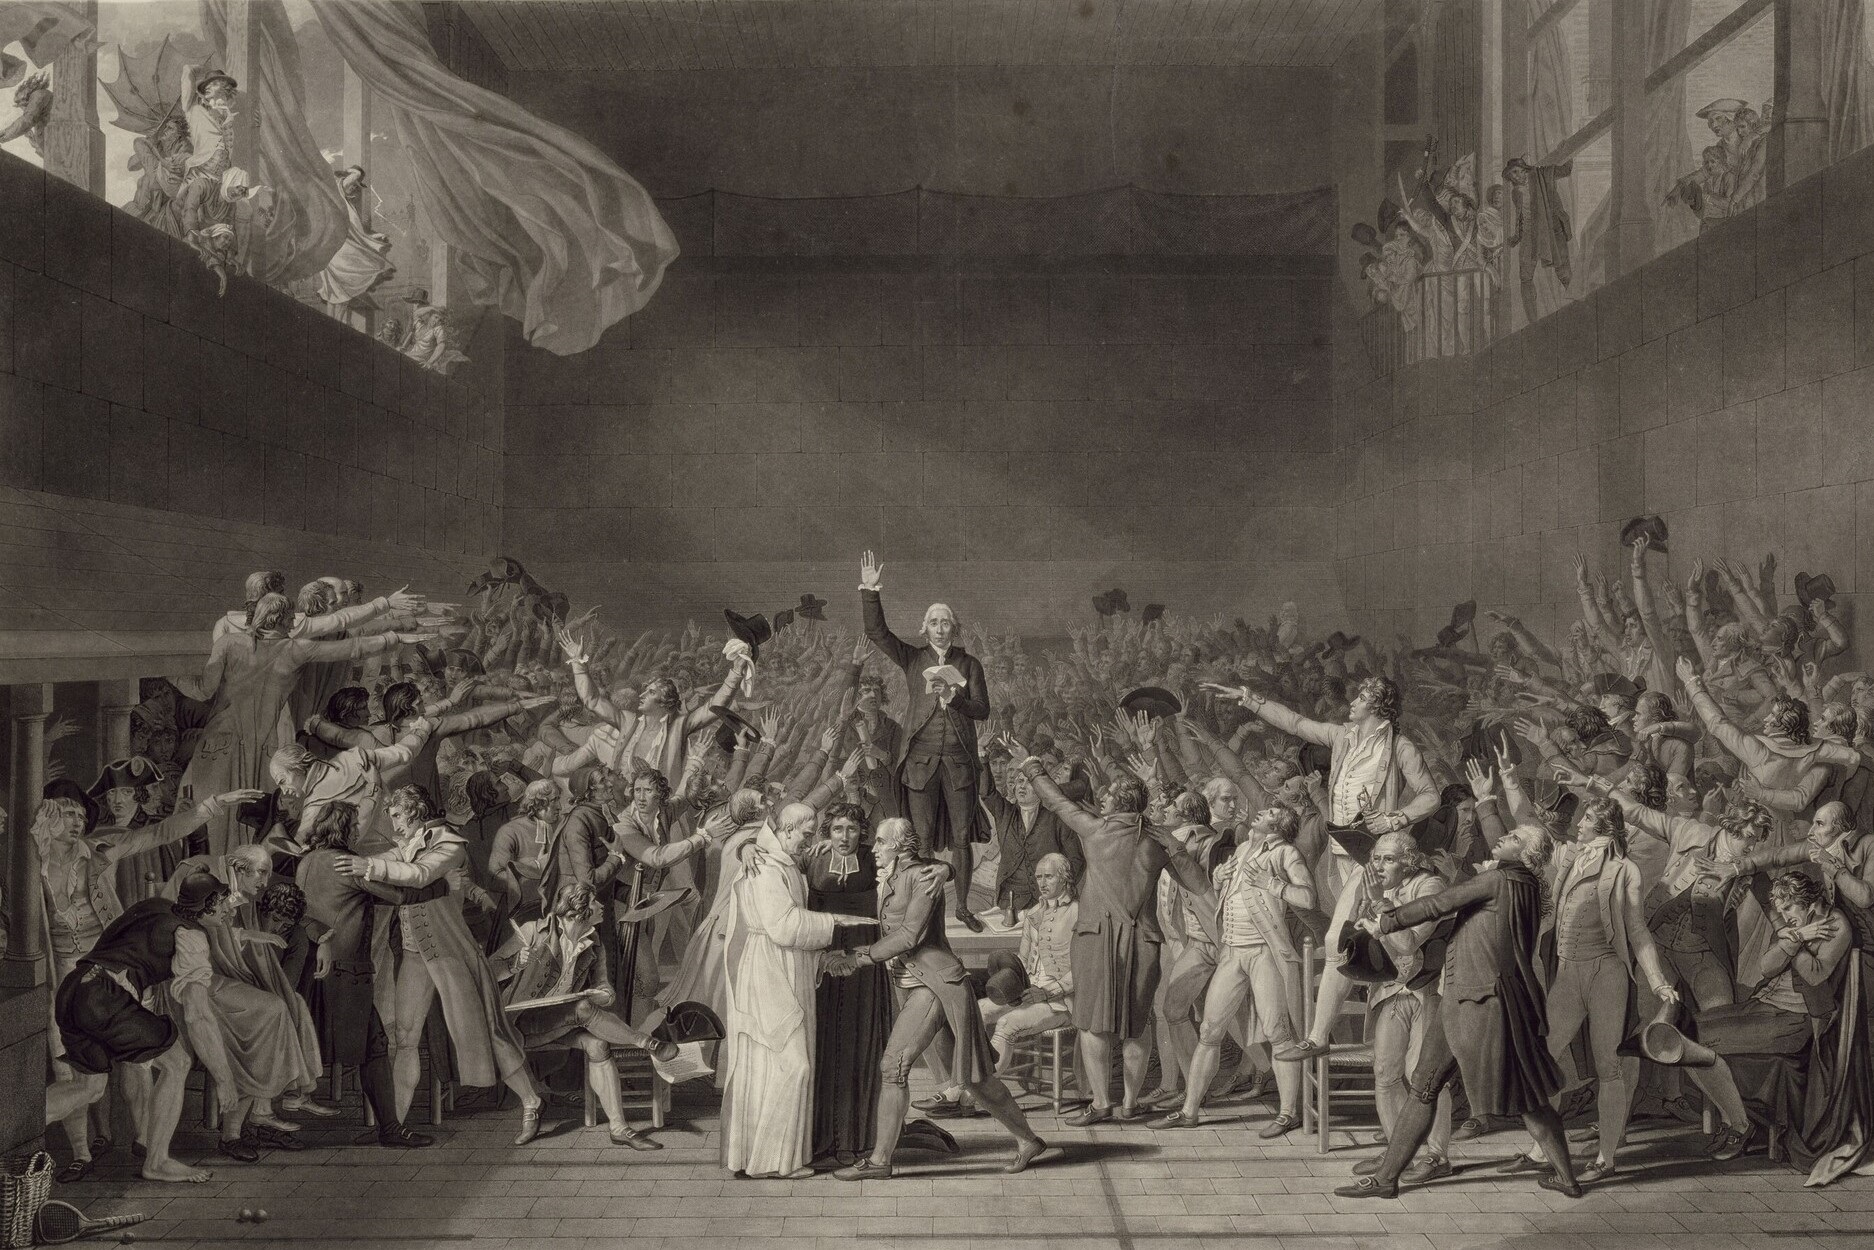 what factors led to the french revolution